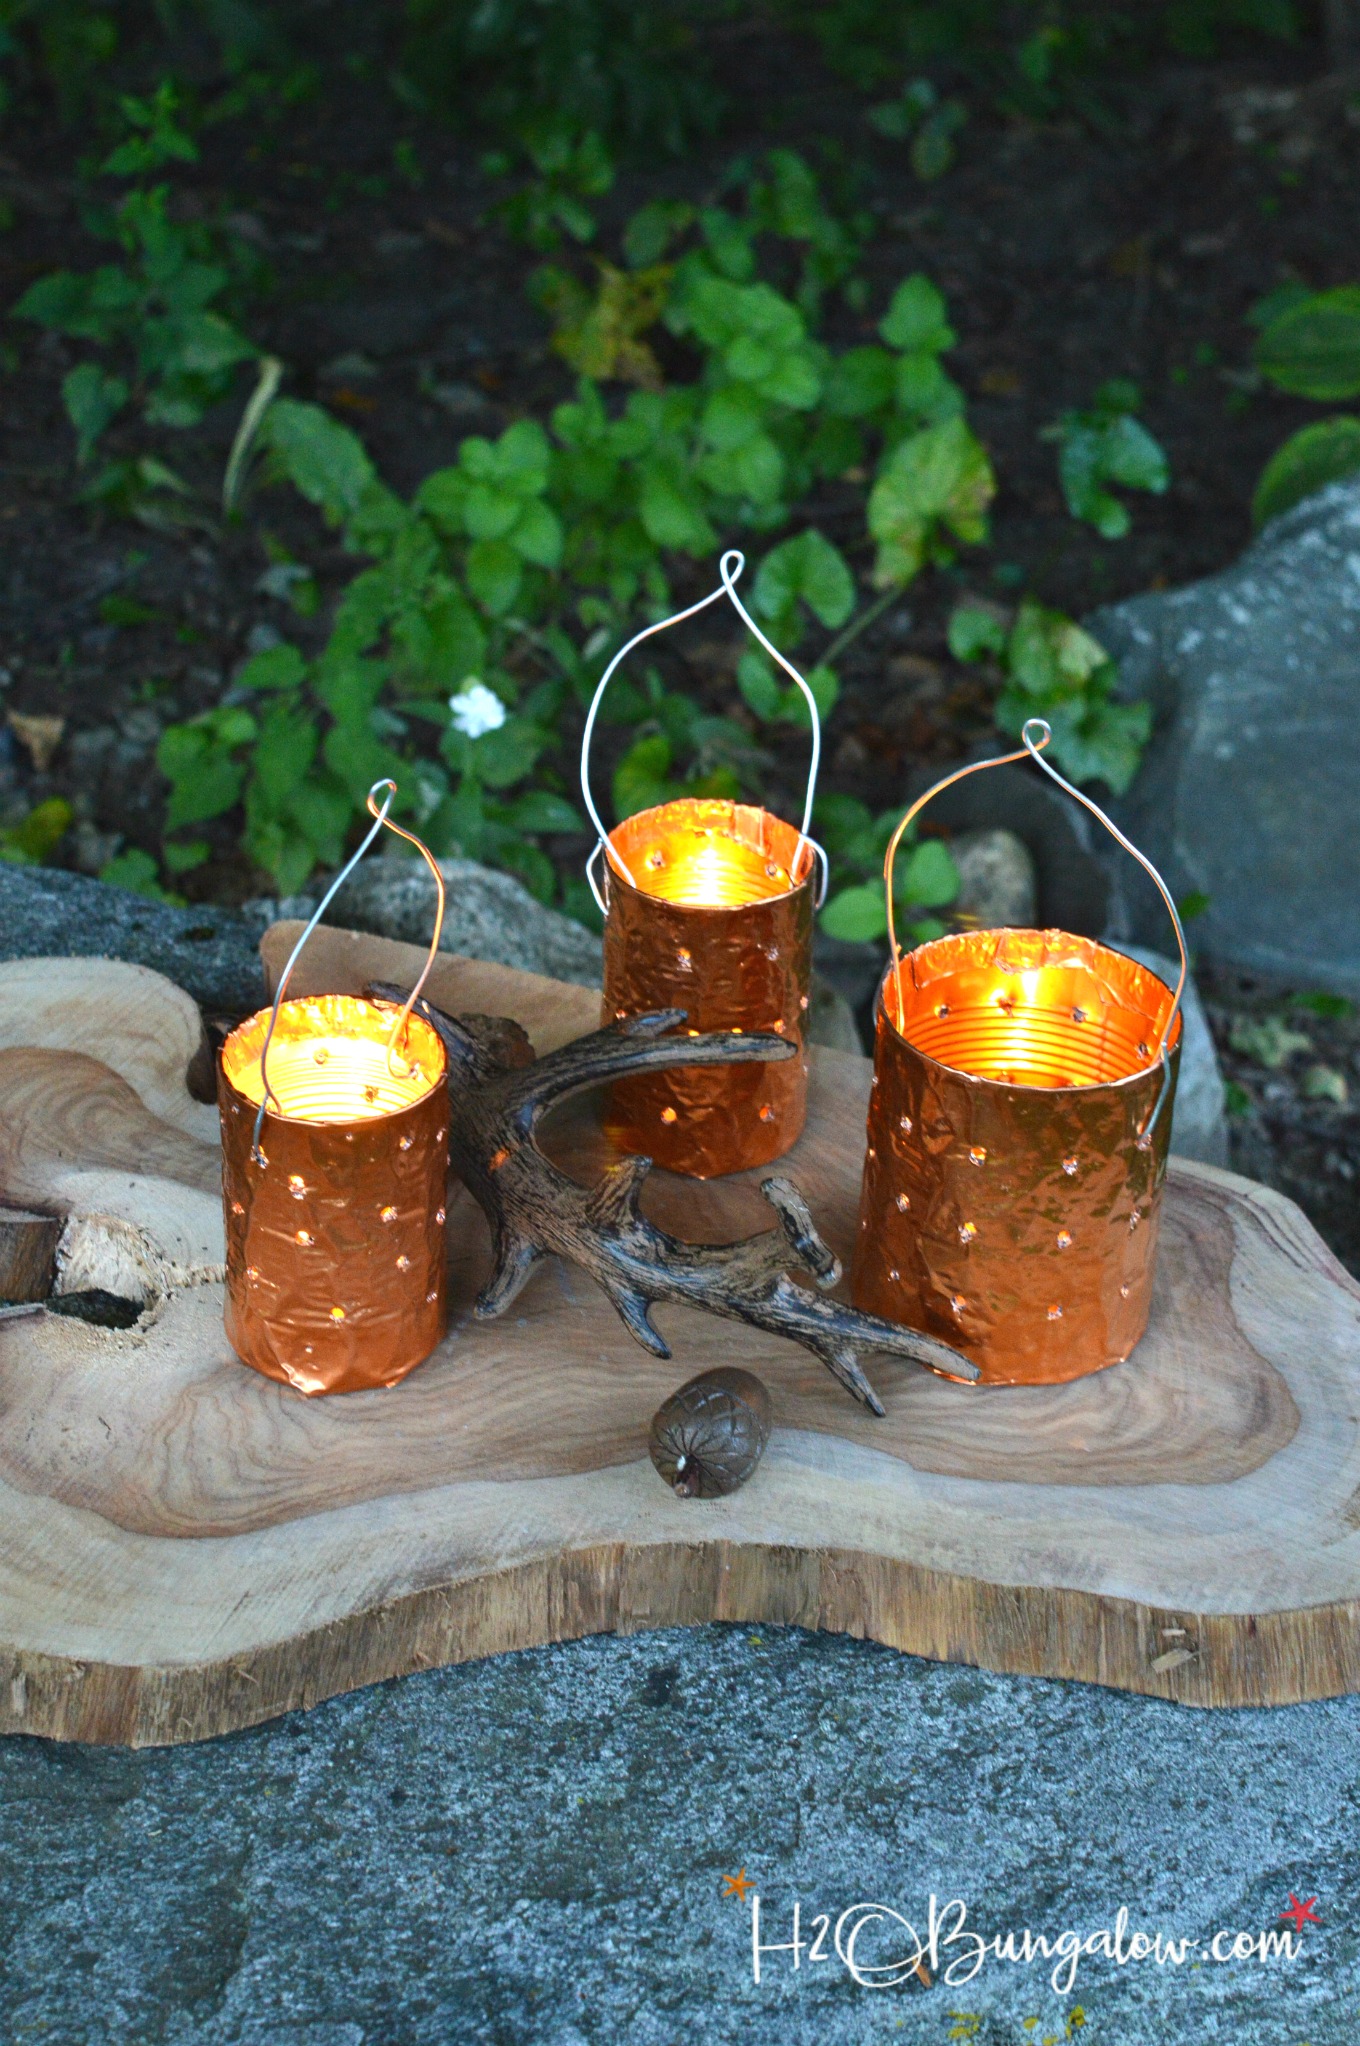 DIY copper tin can candle holders are a simple upcycle project for outdoor lighting. Make your own candle holders from cans and a drill. 